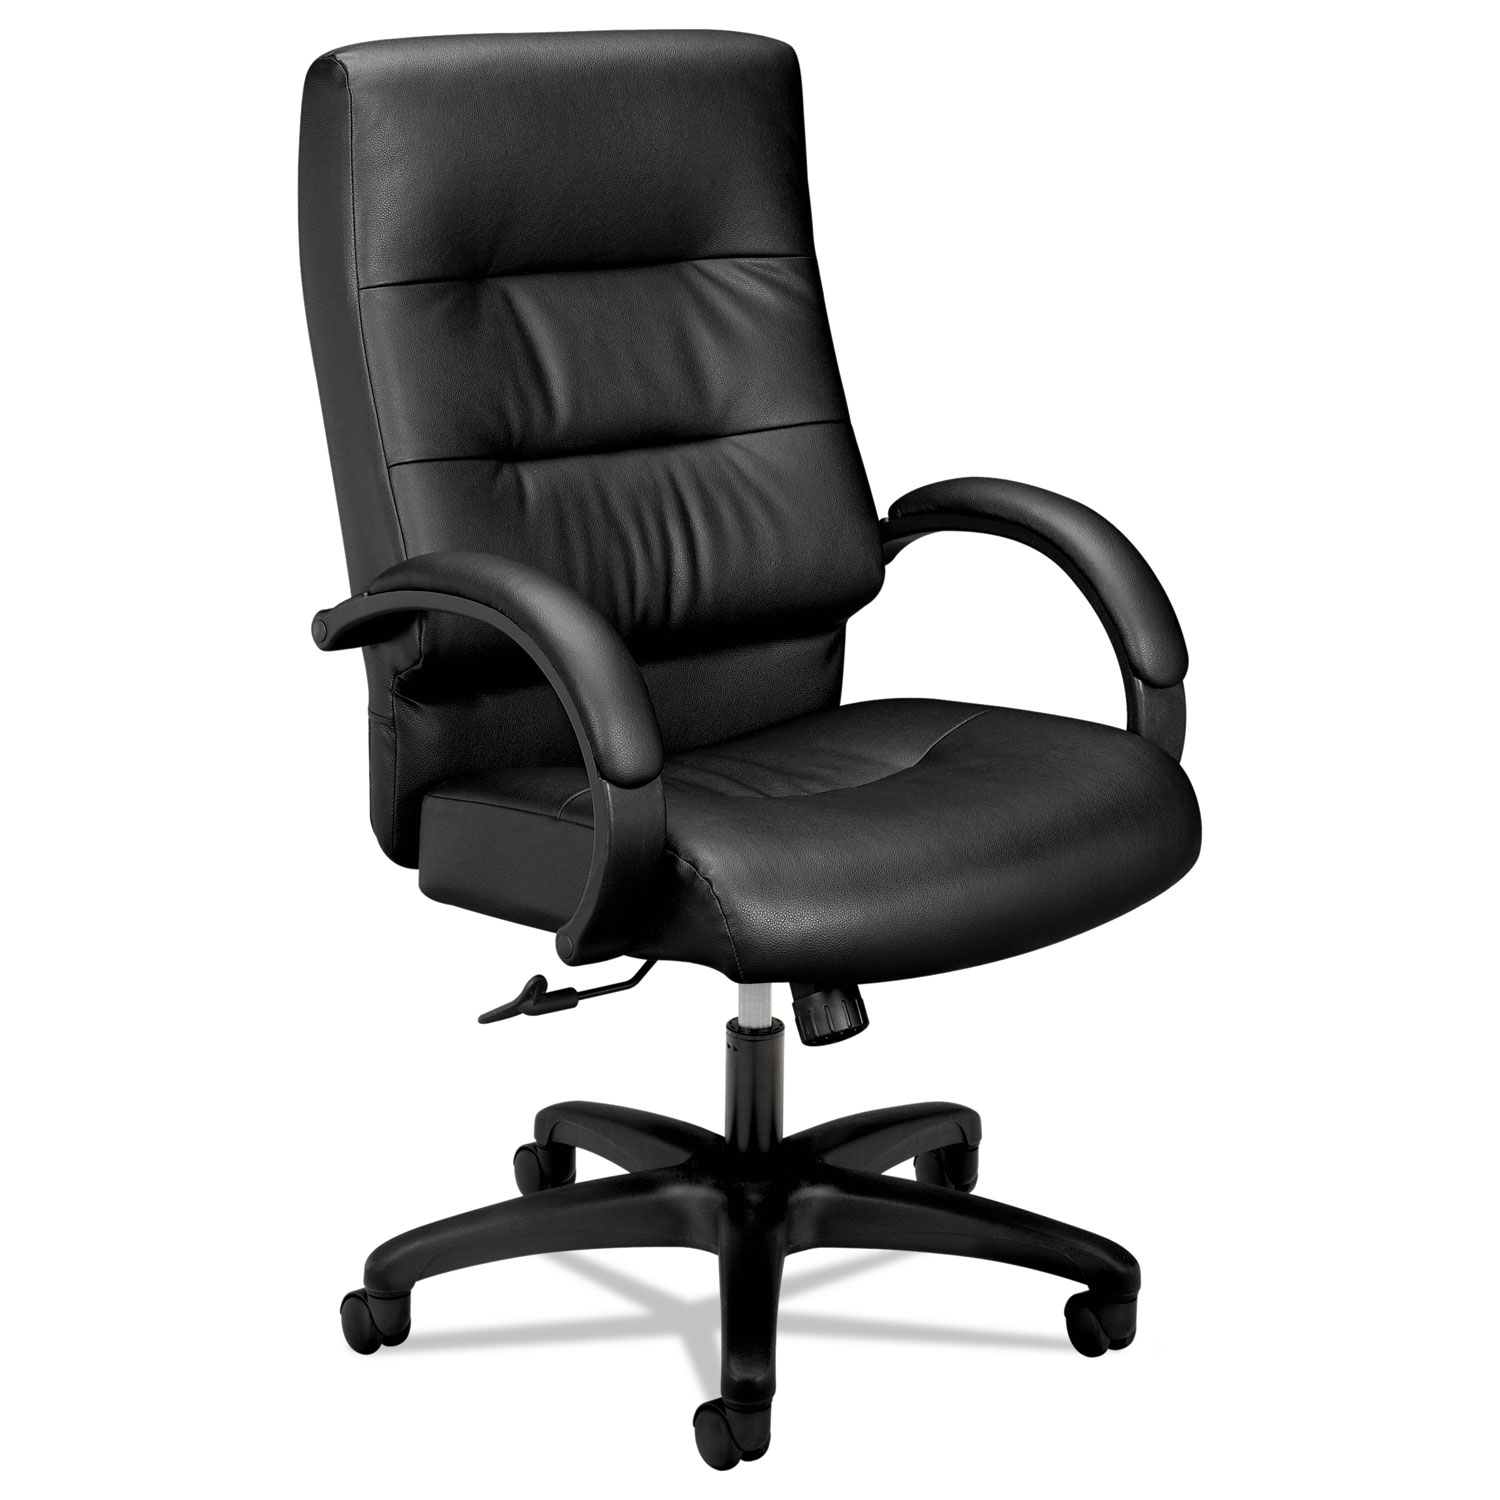 VL690 Series Executive High-Back Leather Chair, Black Leather